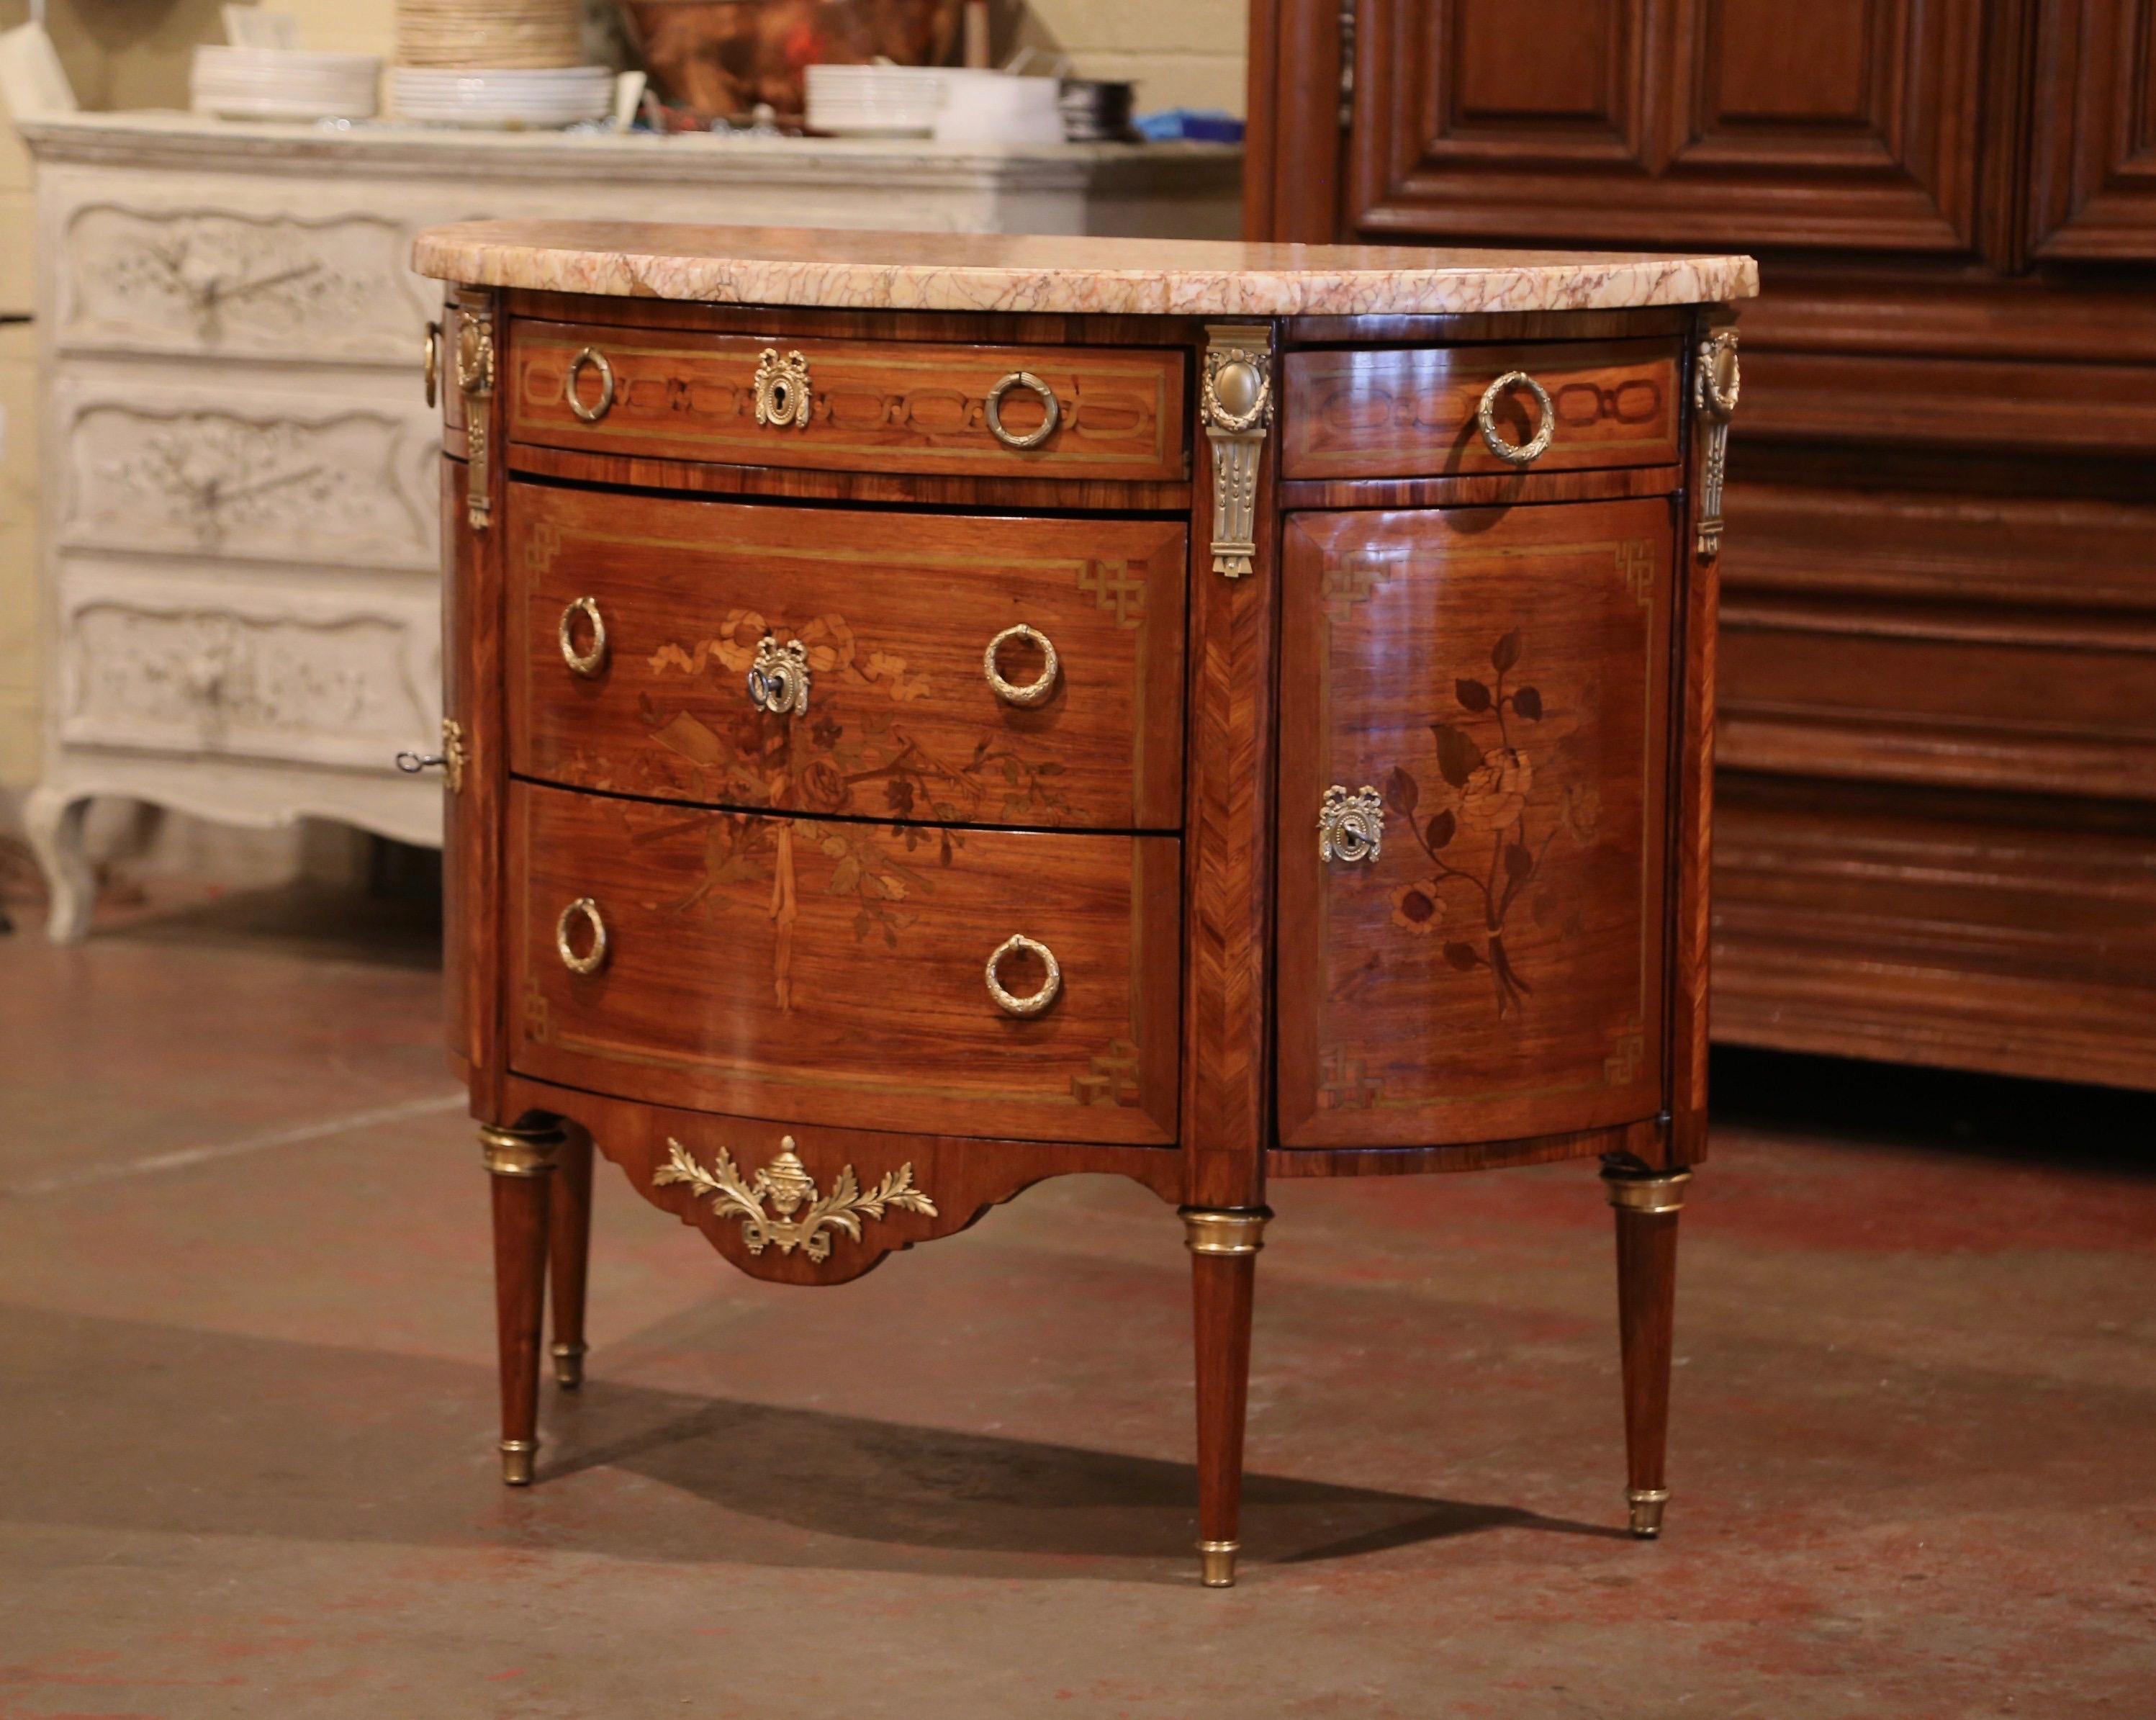 Crafted in Paris, circa 1870, the fruitwood commode shaped as a demilune (or half moon), stands on tapered and fluted legs decorated at the base and shoulders with brass caps. The cabinet features three bombe drawers across the front and two curved